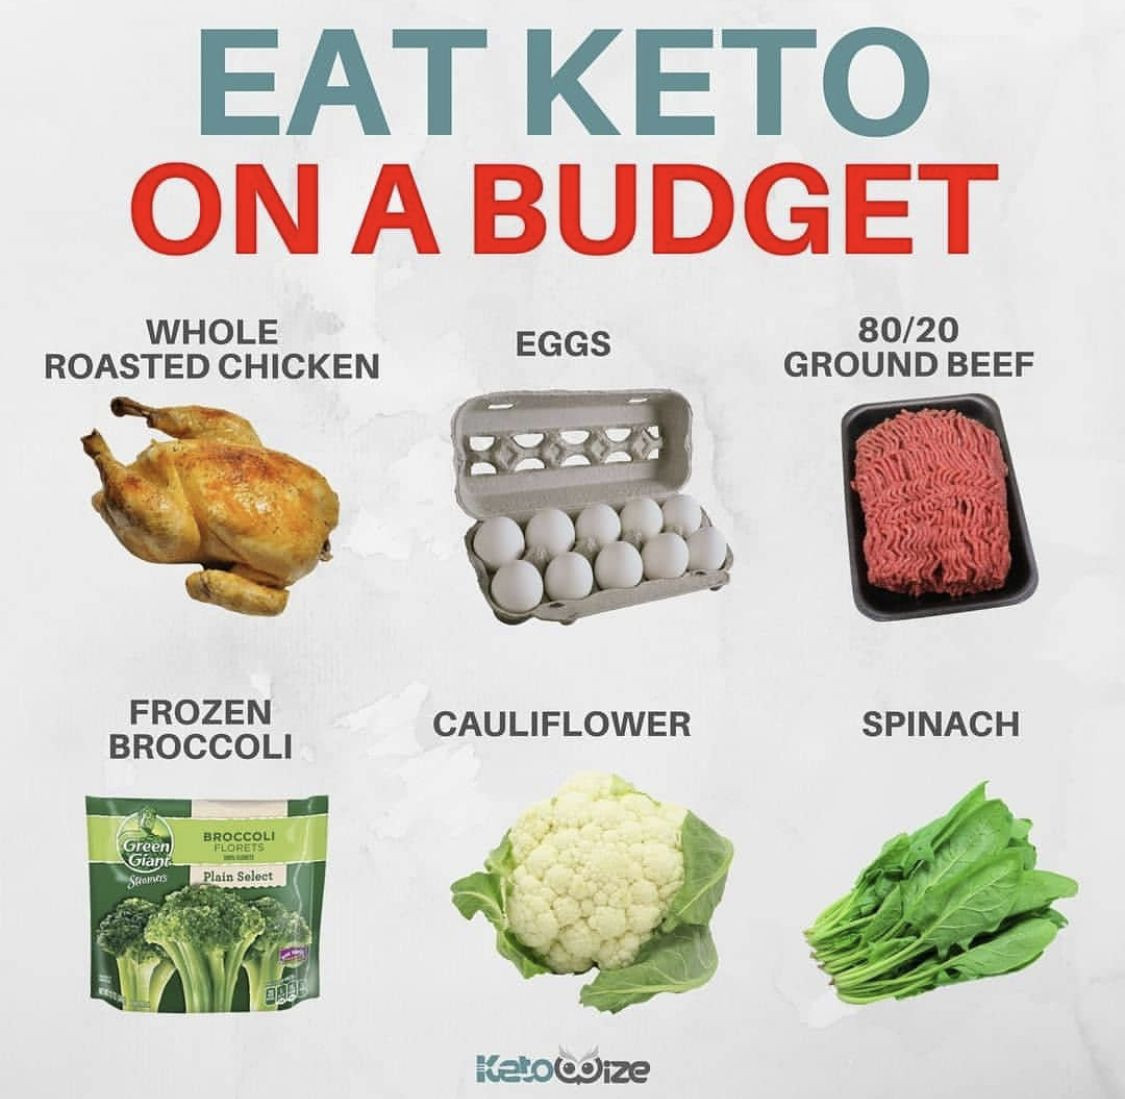 Vegetarian Keto Meal Plan On A Budget
 Pin by Taylor Baker on Keto